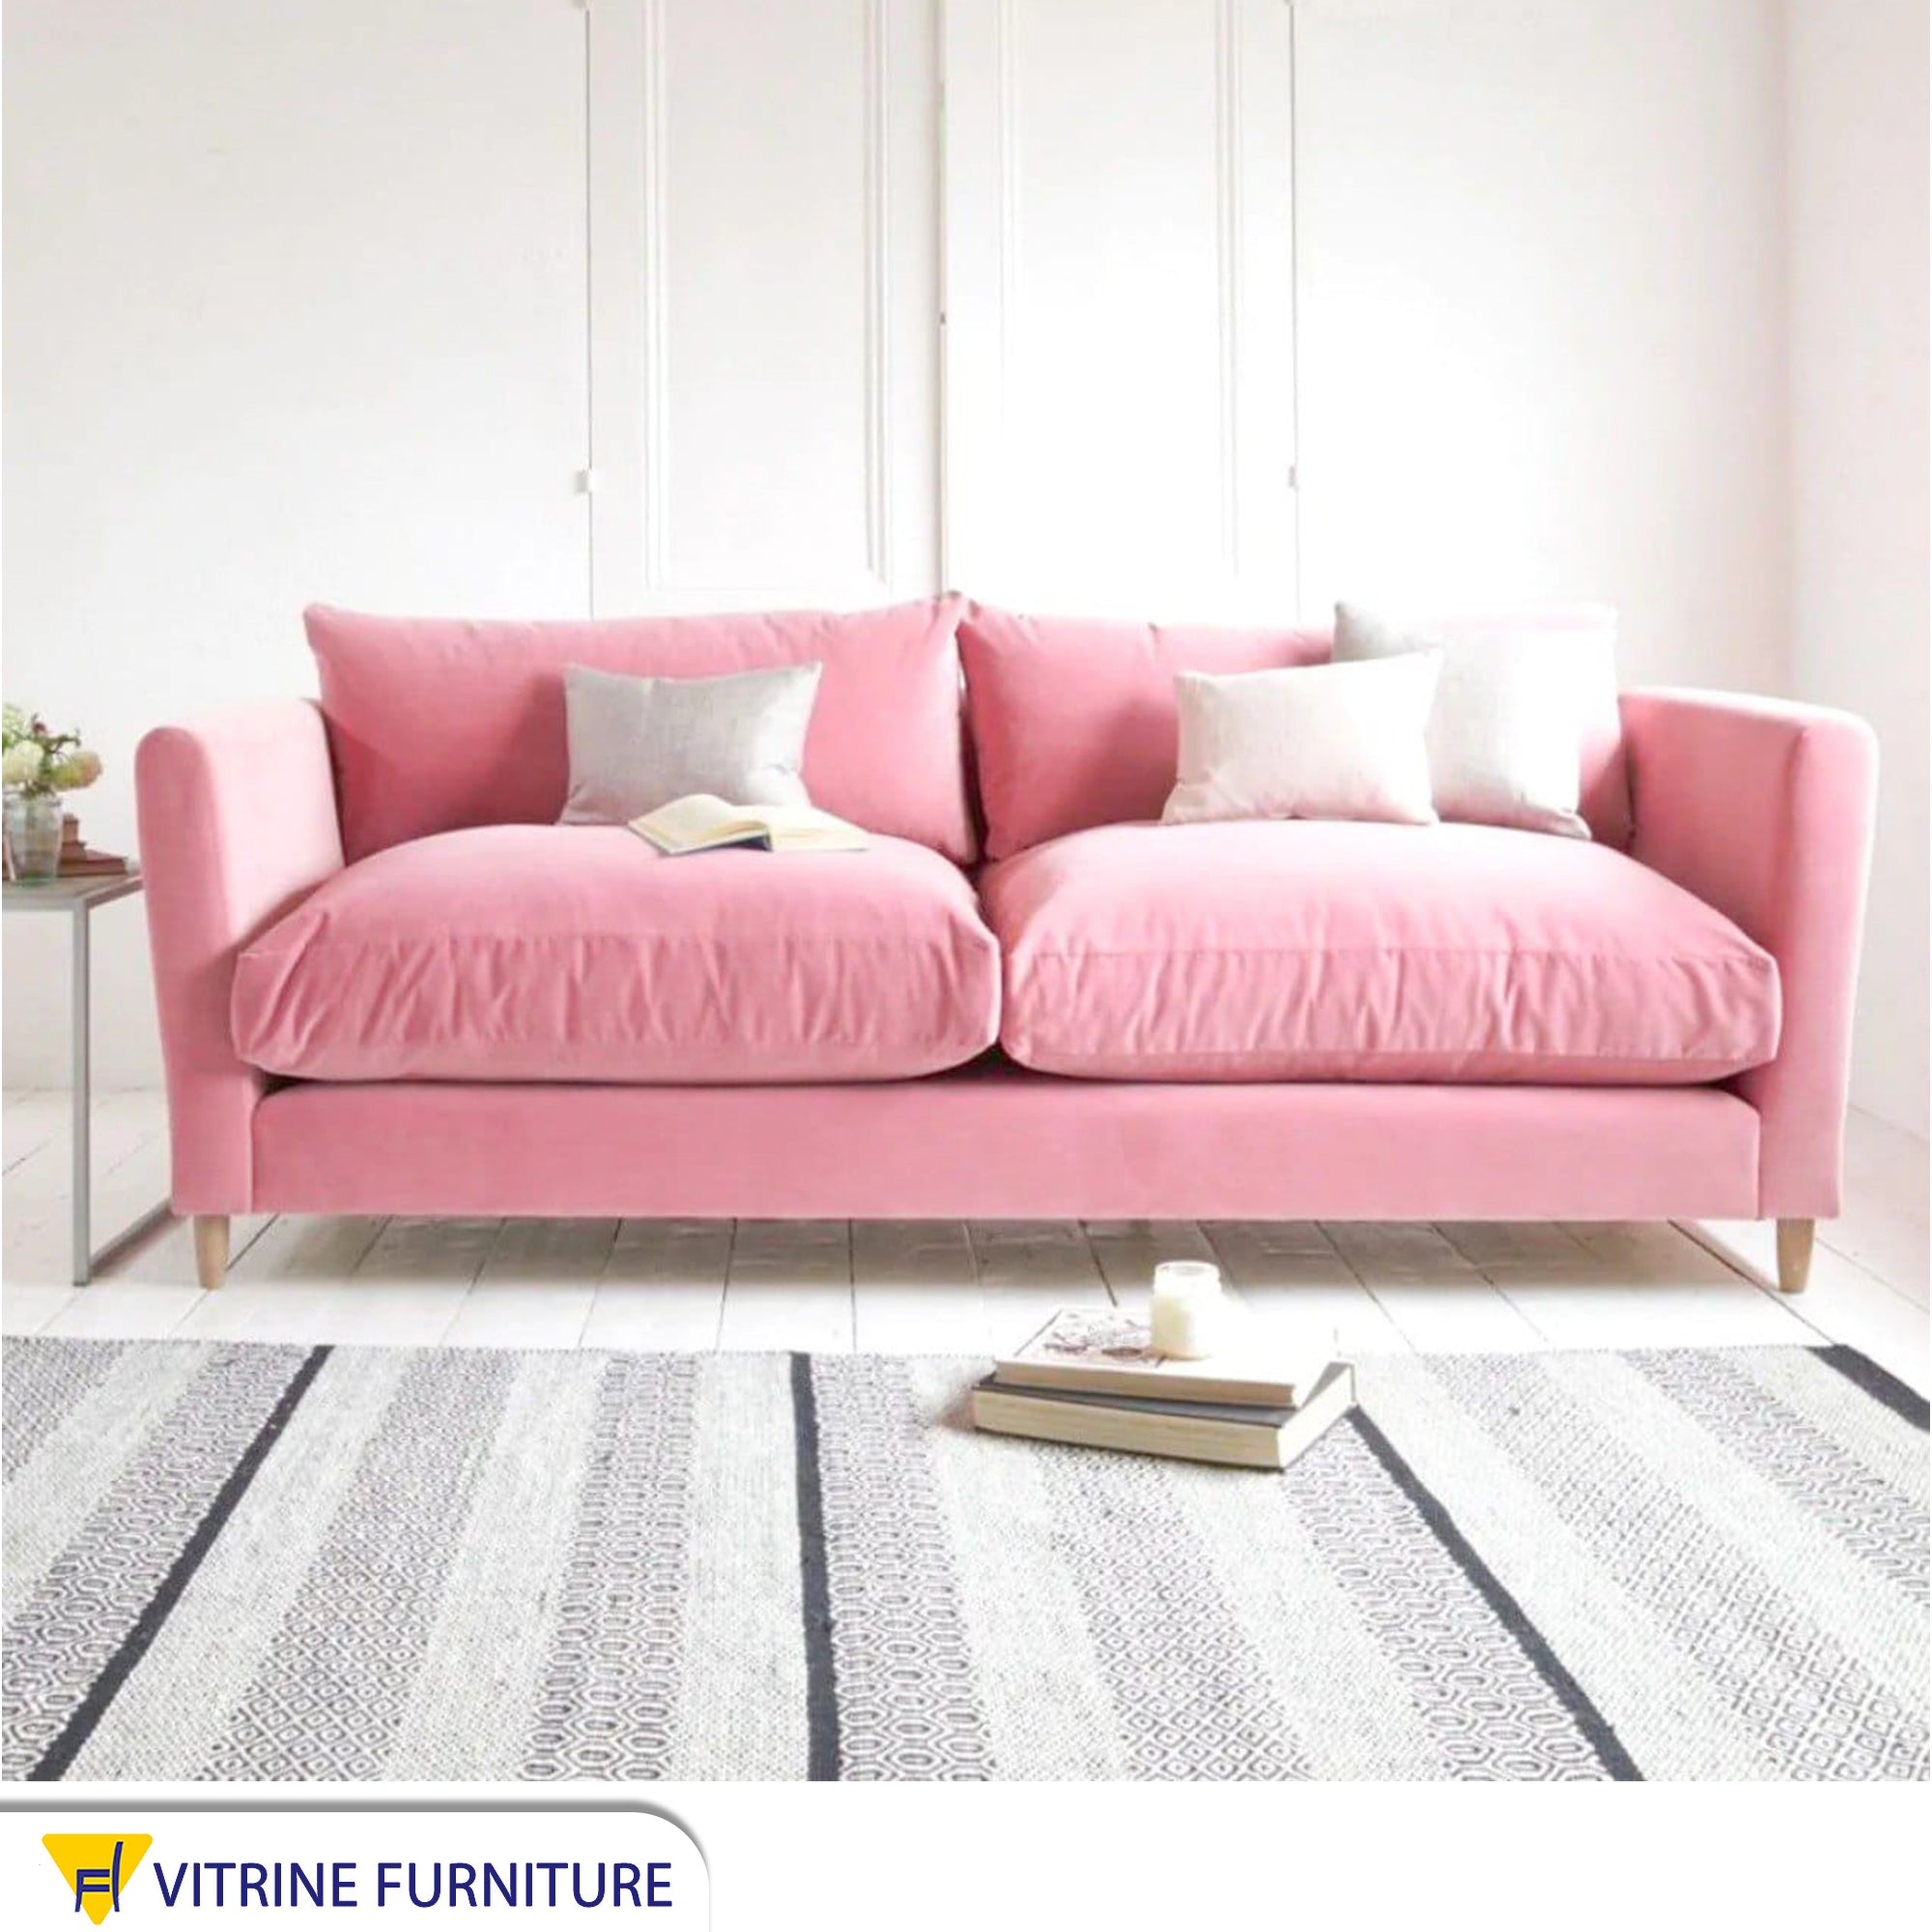 Double pink sofa